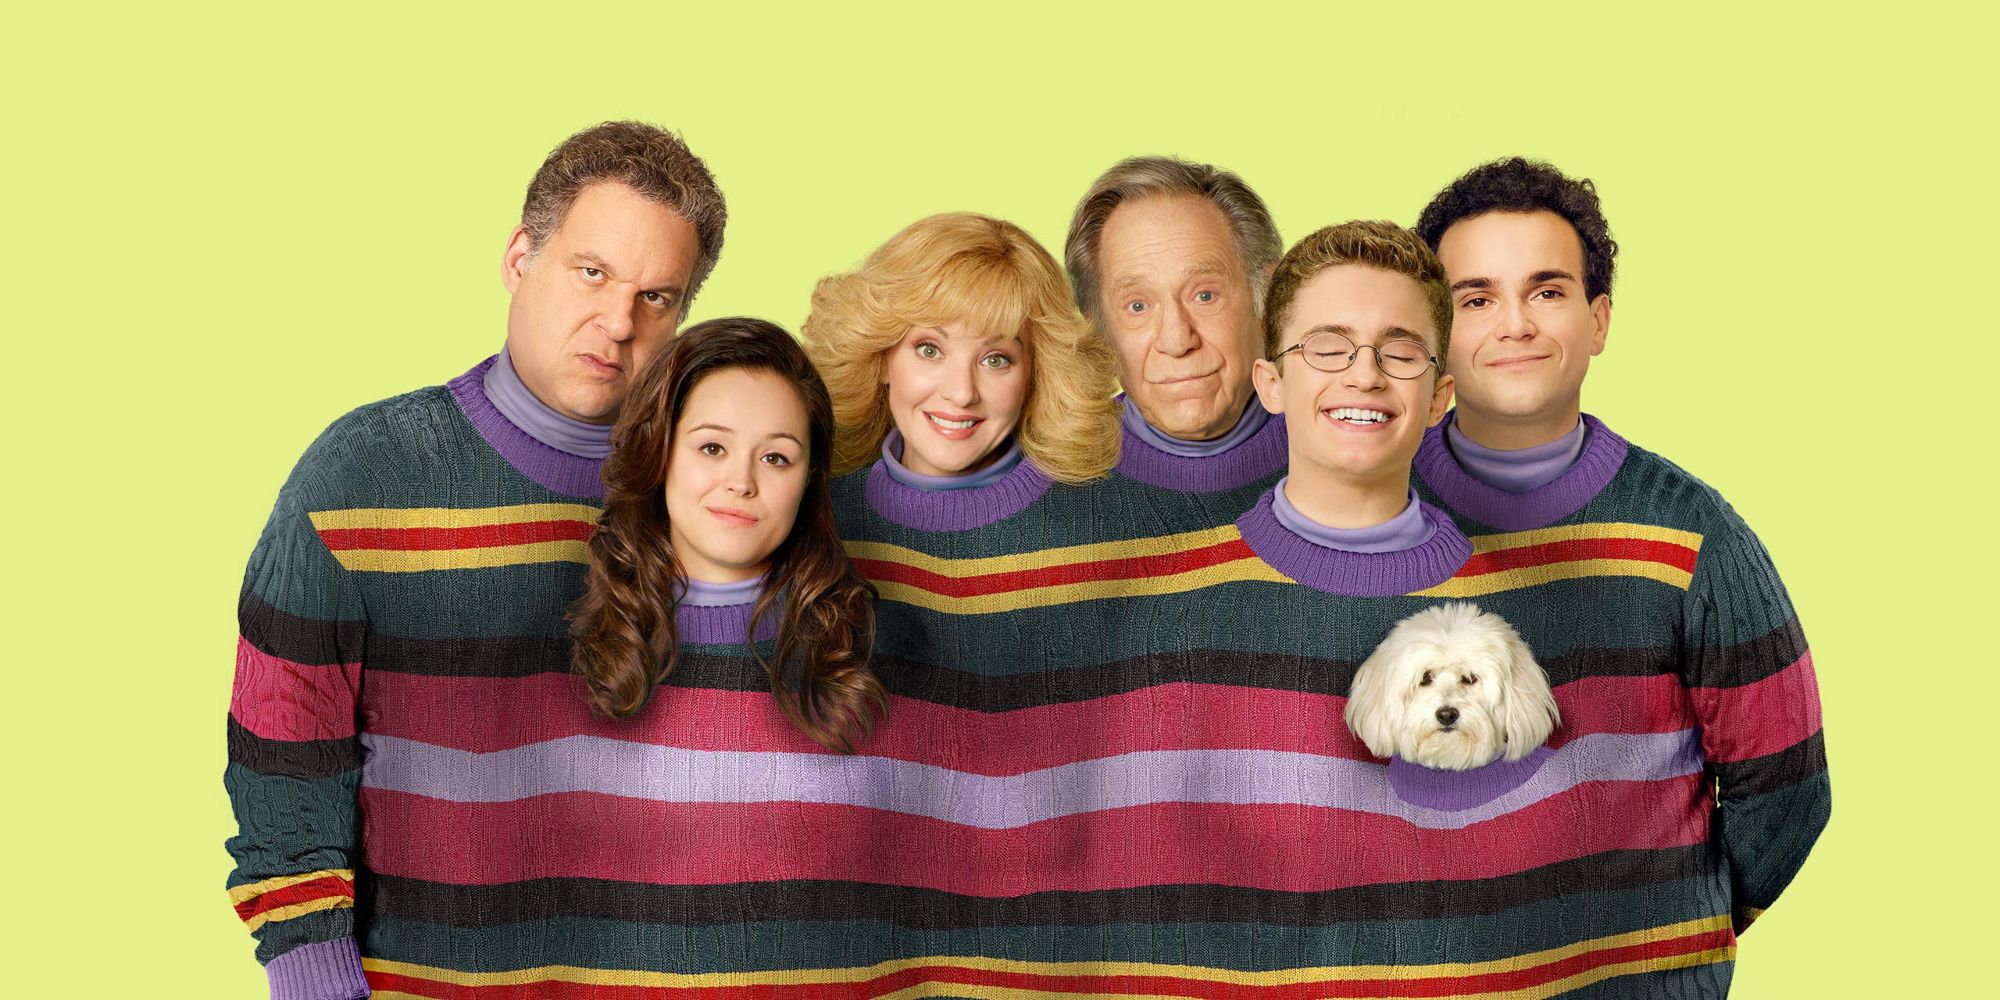 The main characters from The Goldbergs sharing the same sweater